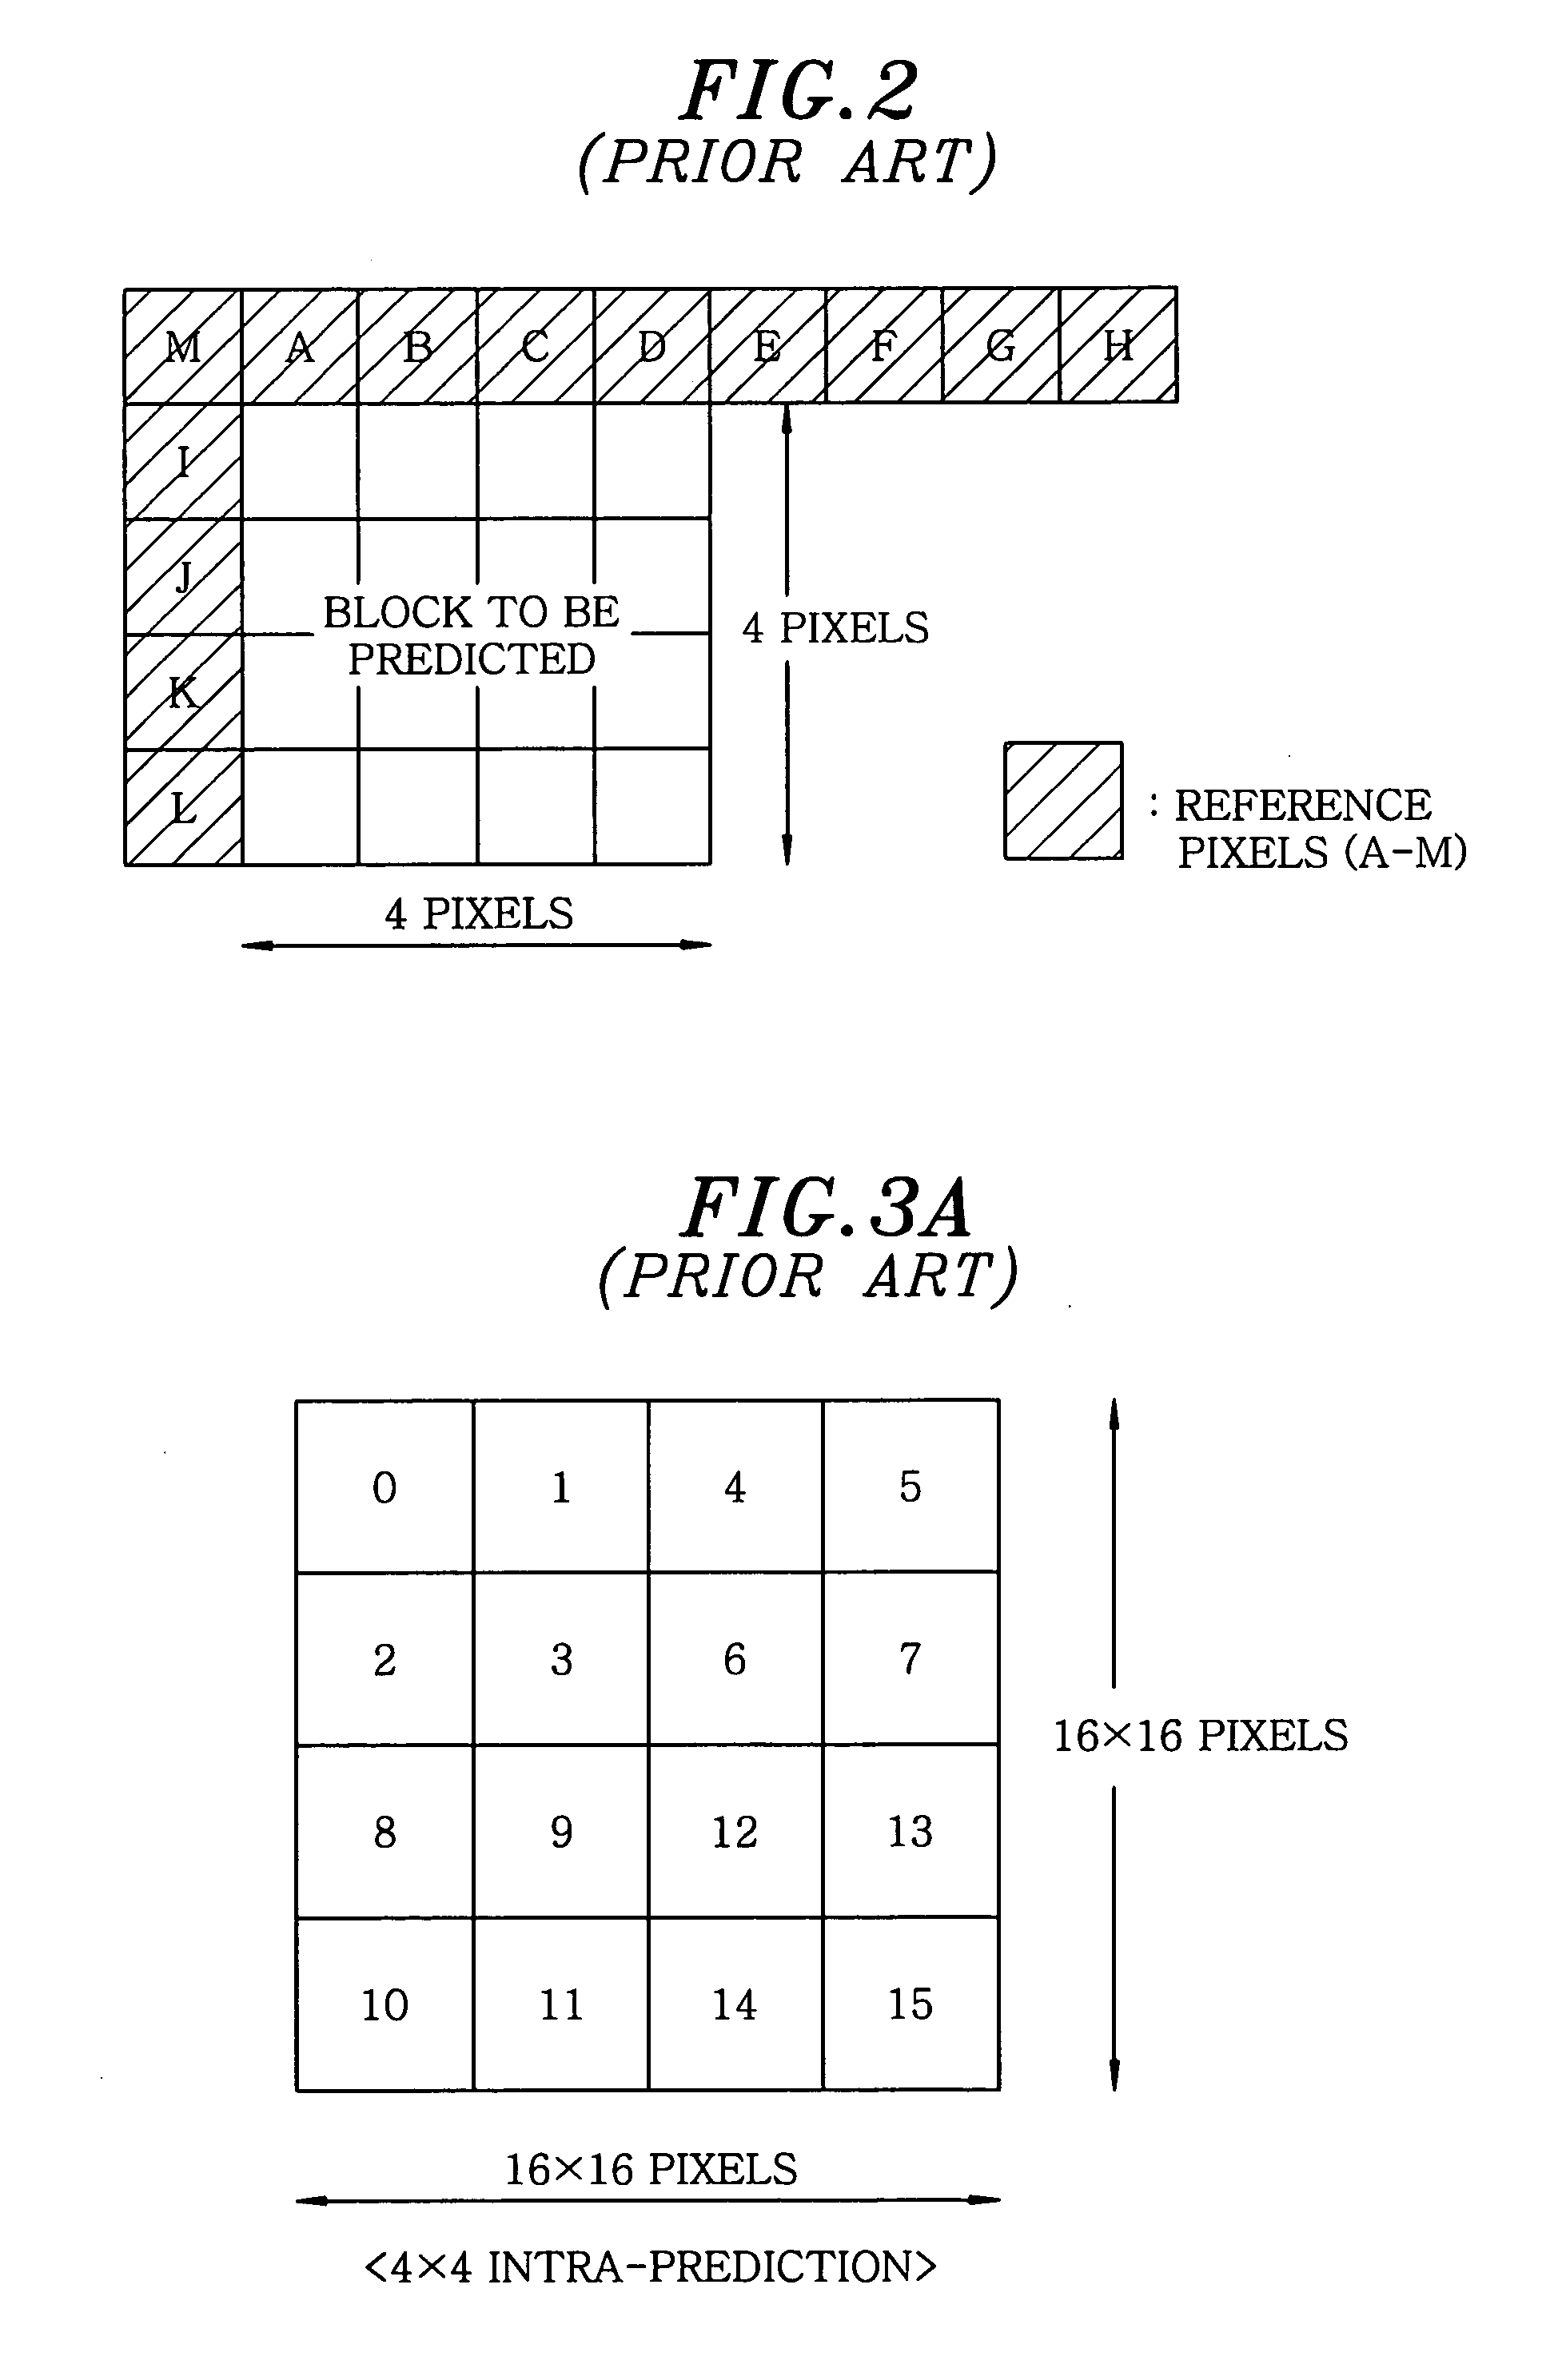 Moving picture coding apparatus